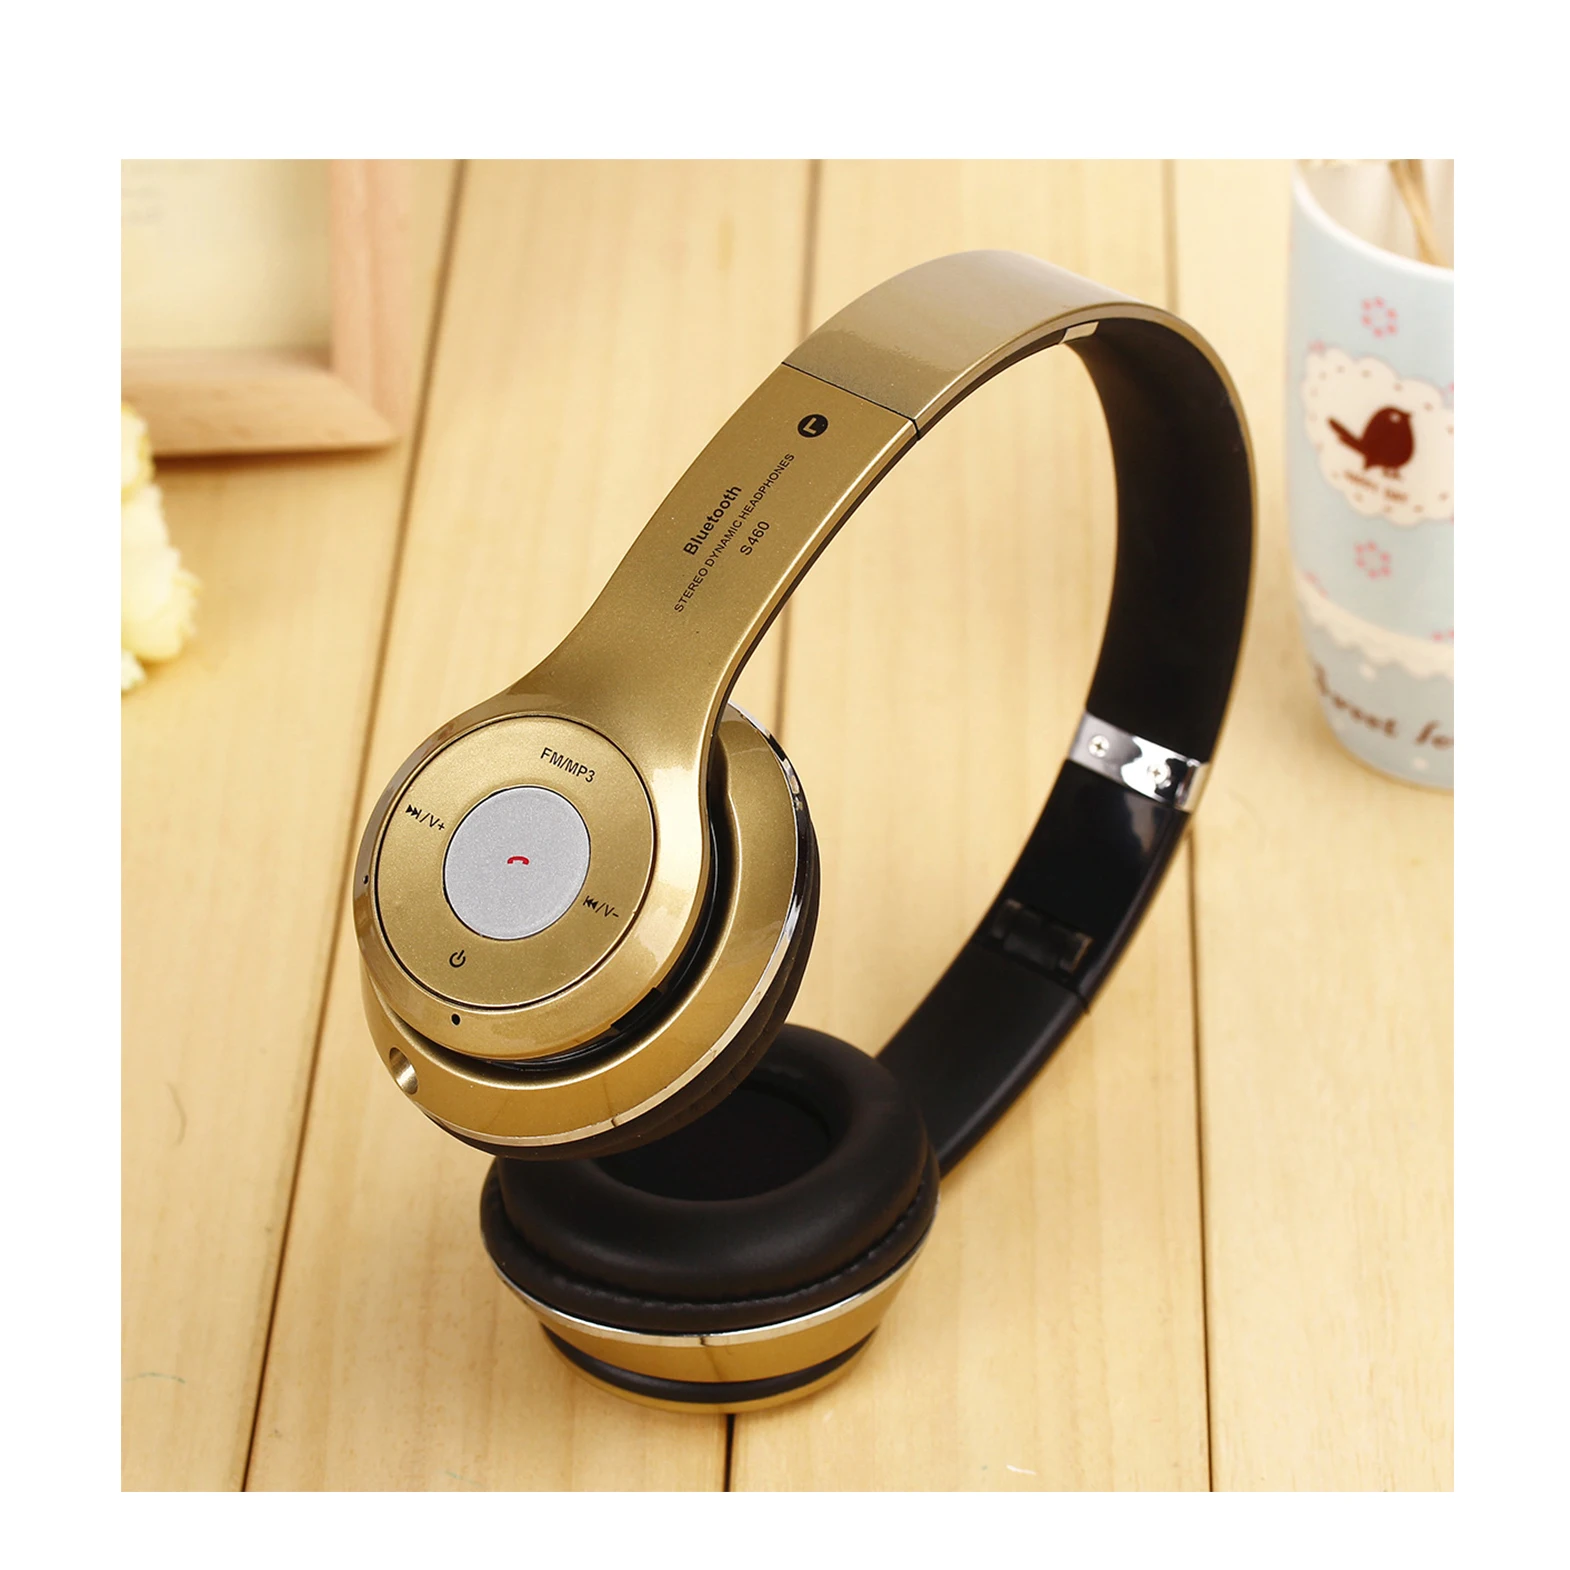 

FB-S460 ANC noise cancelling video songs VH610 gamming headset earphone earbuds wireless headphones